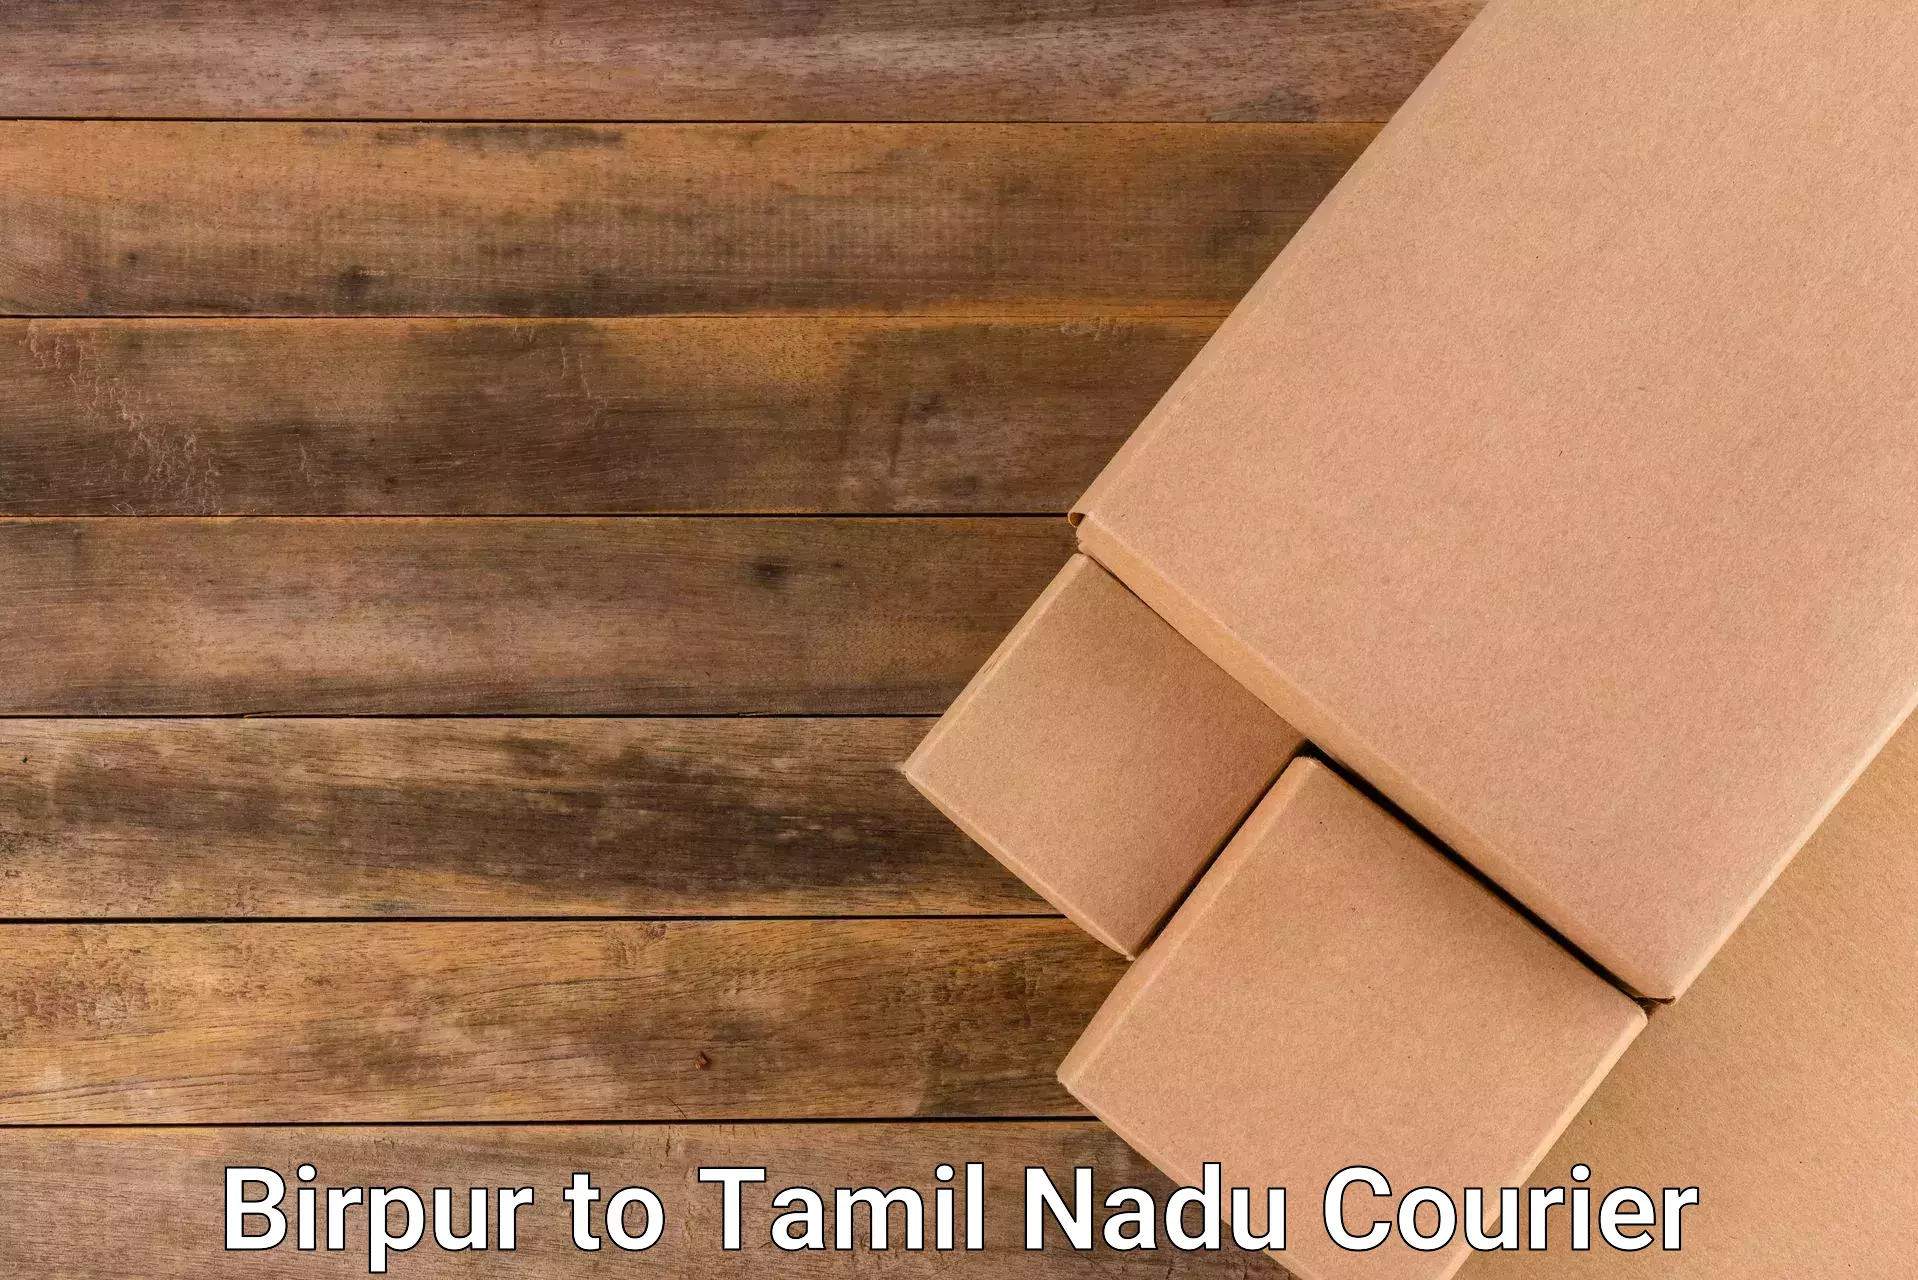 Local delivery service Birpur to Tamil Nadu